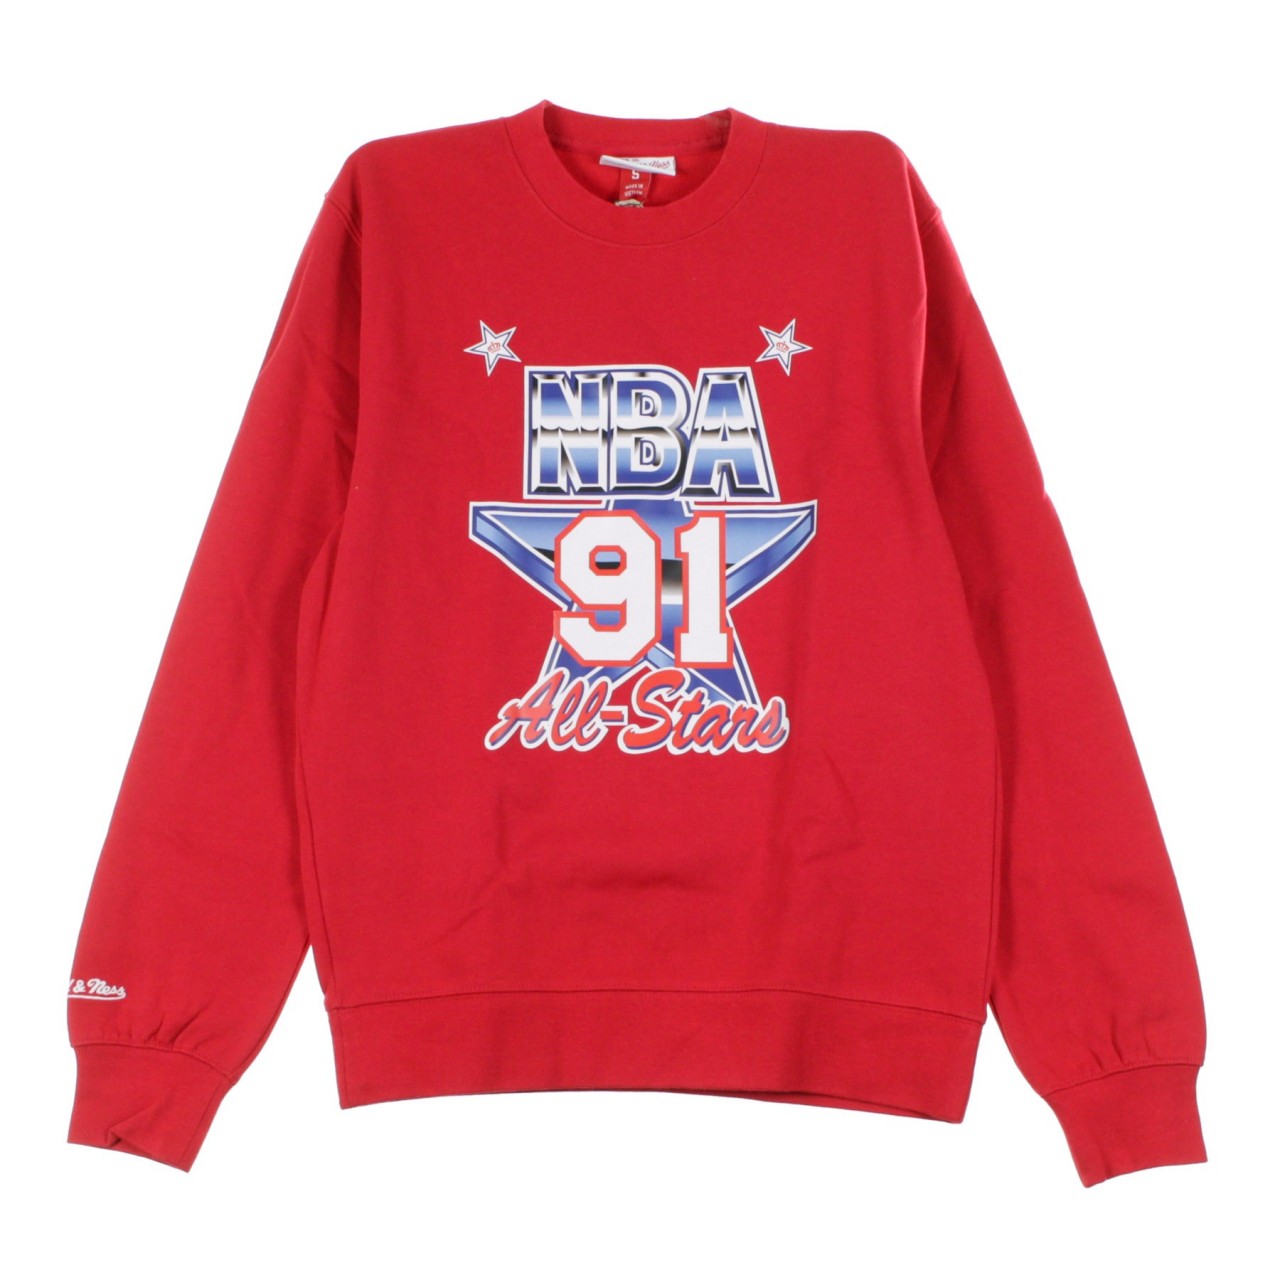 MITCHELL & NESS ASG CREW FLEECE ALL STAR GAME WEST 1991 BMFCMM18375-ASWRED1